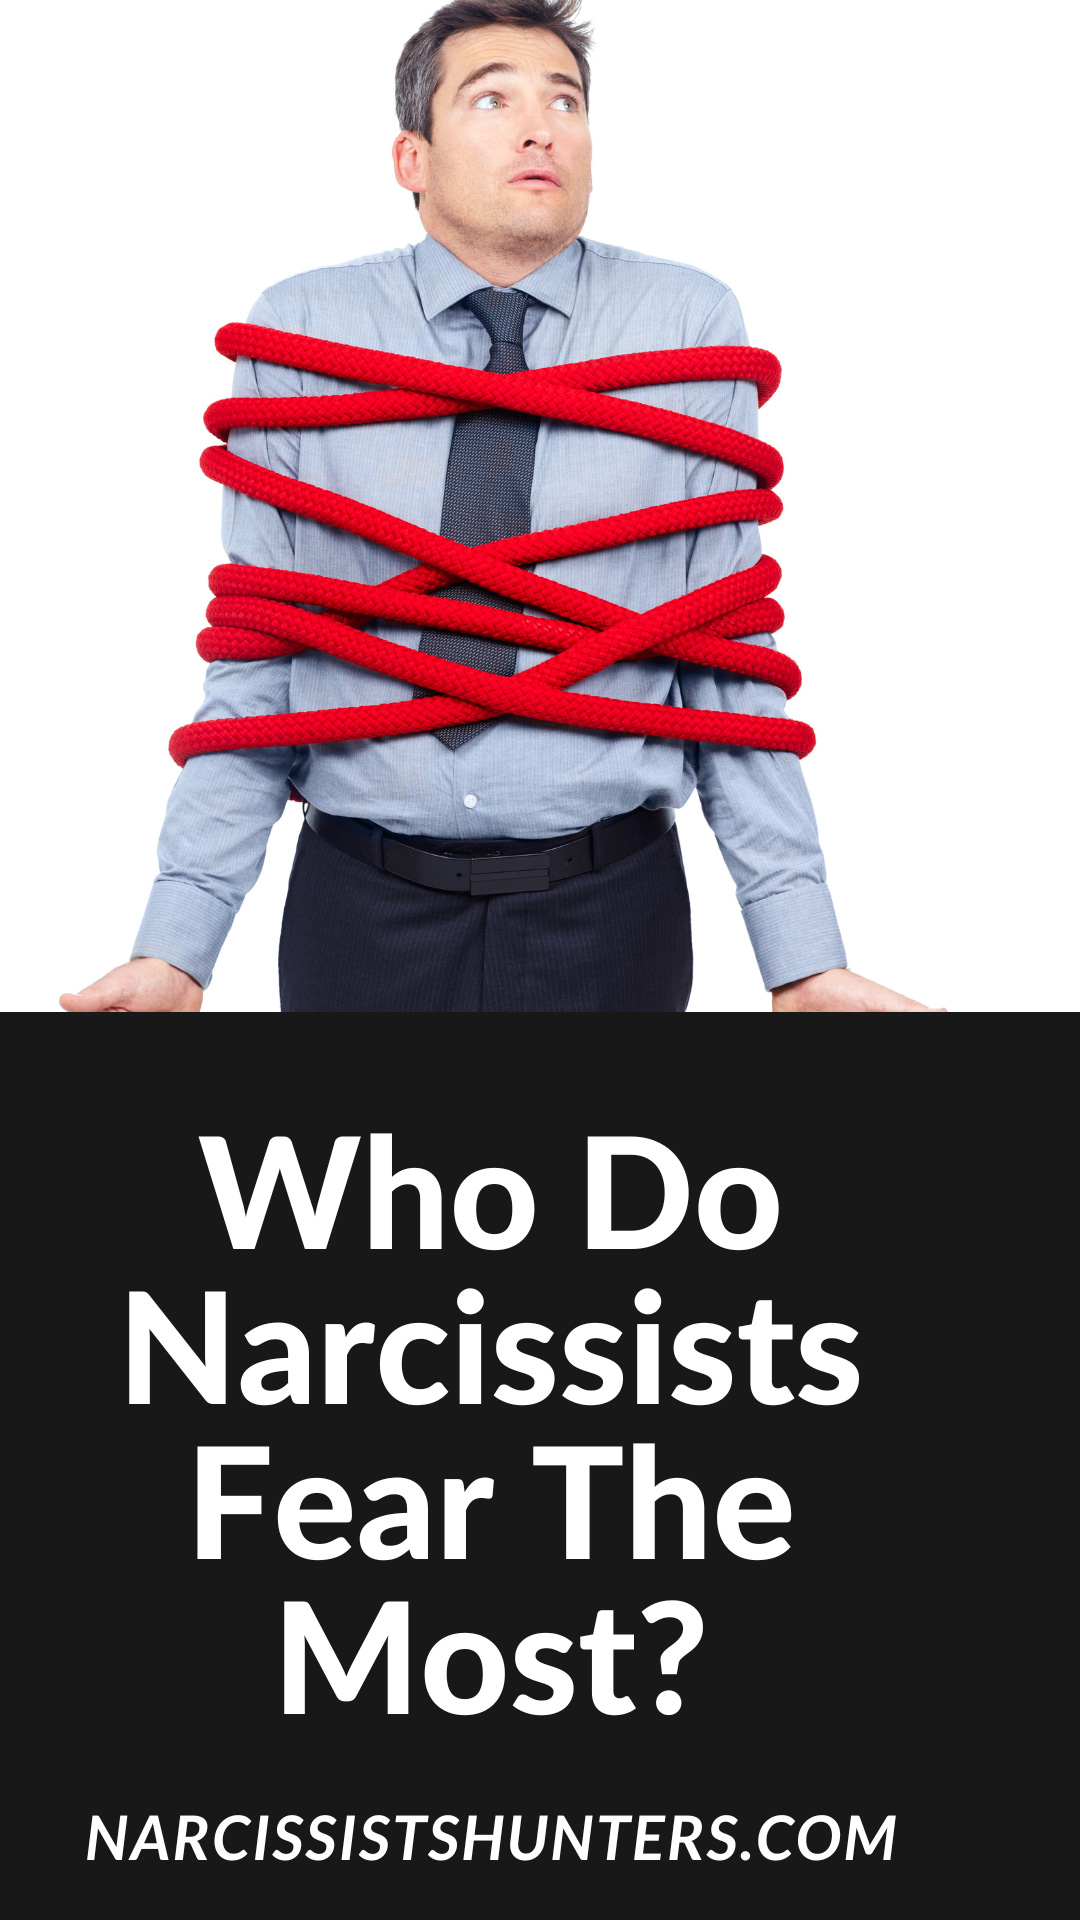 Who Do Narcissists Fear The Most?